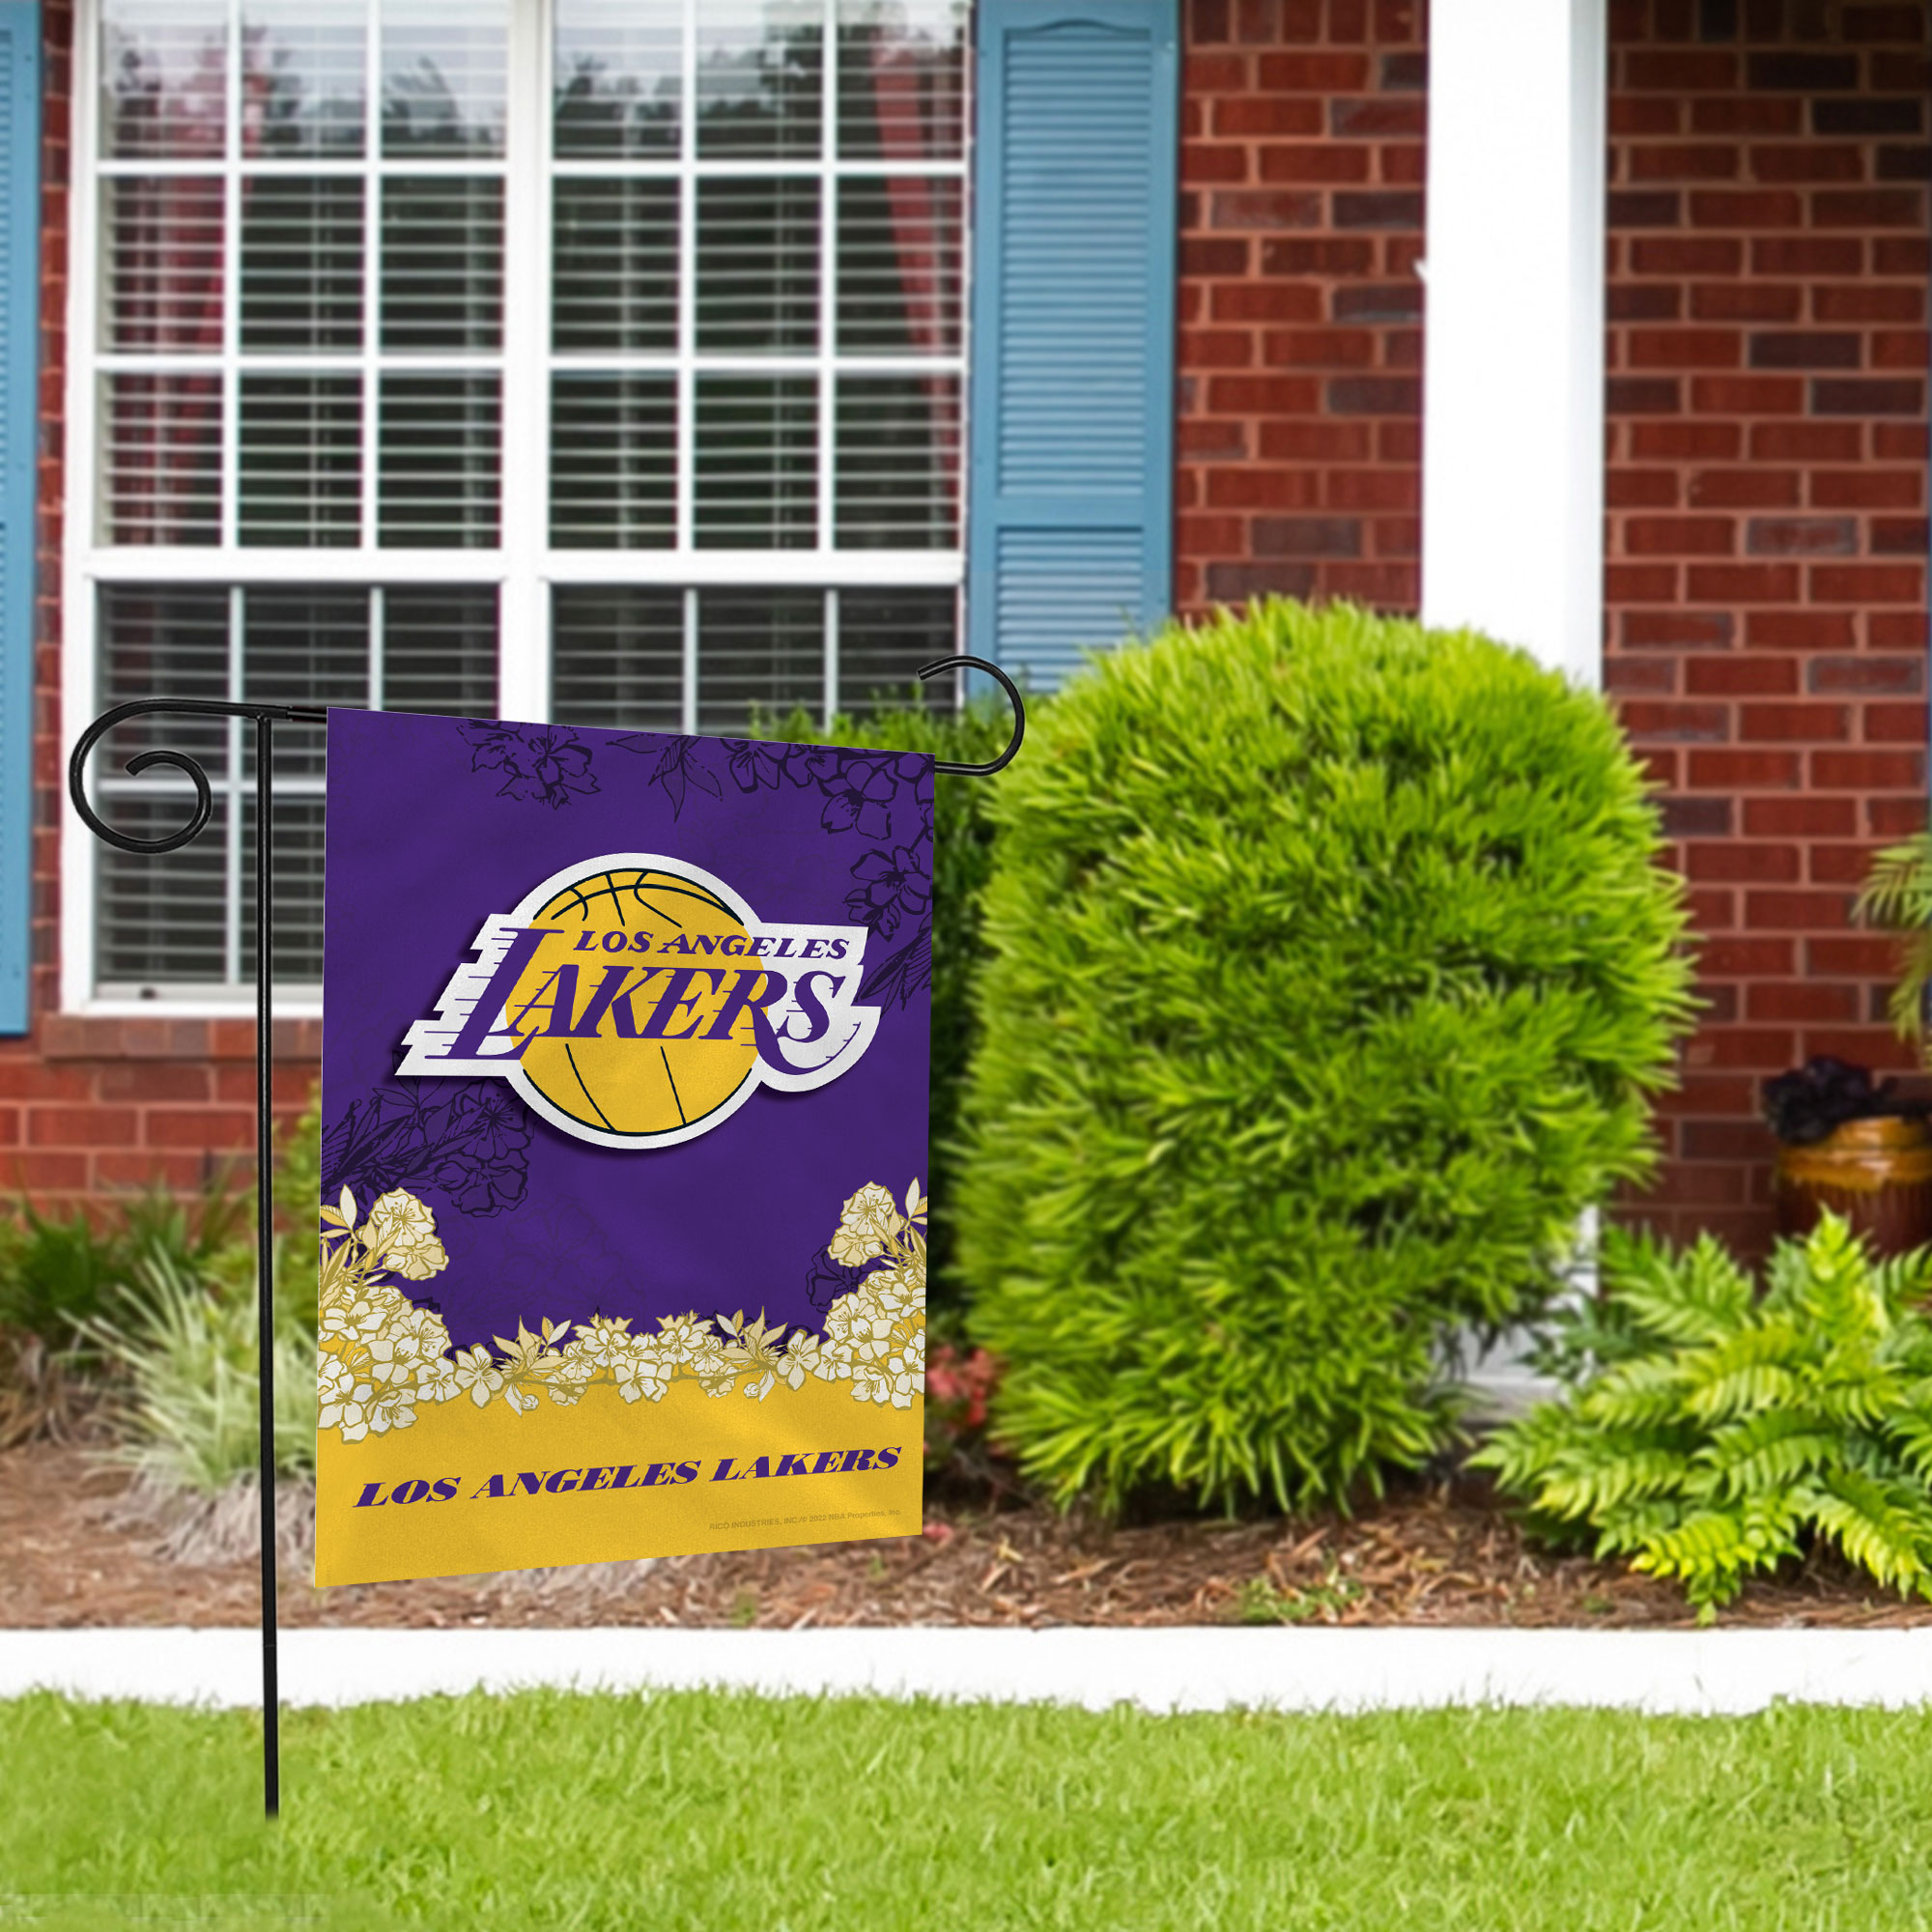 Rico Industries NBA Basketball Los Angeles Lakers Primary Double Sided Garden Flag